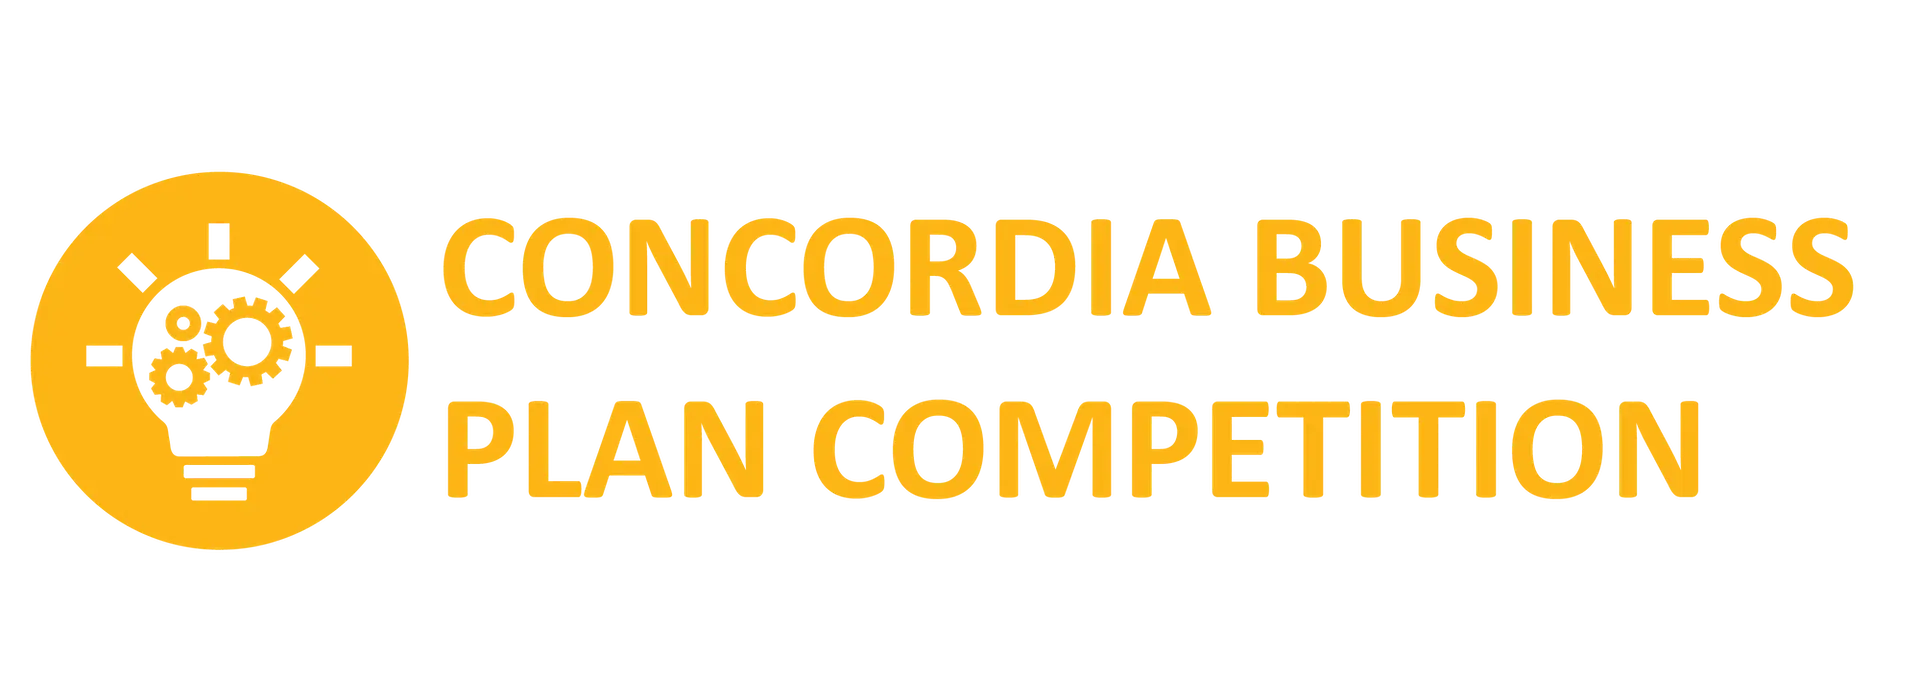 concordia business plan competition